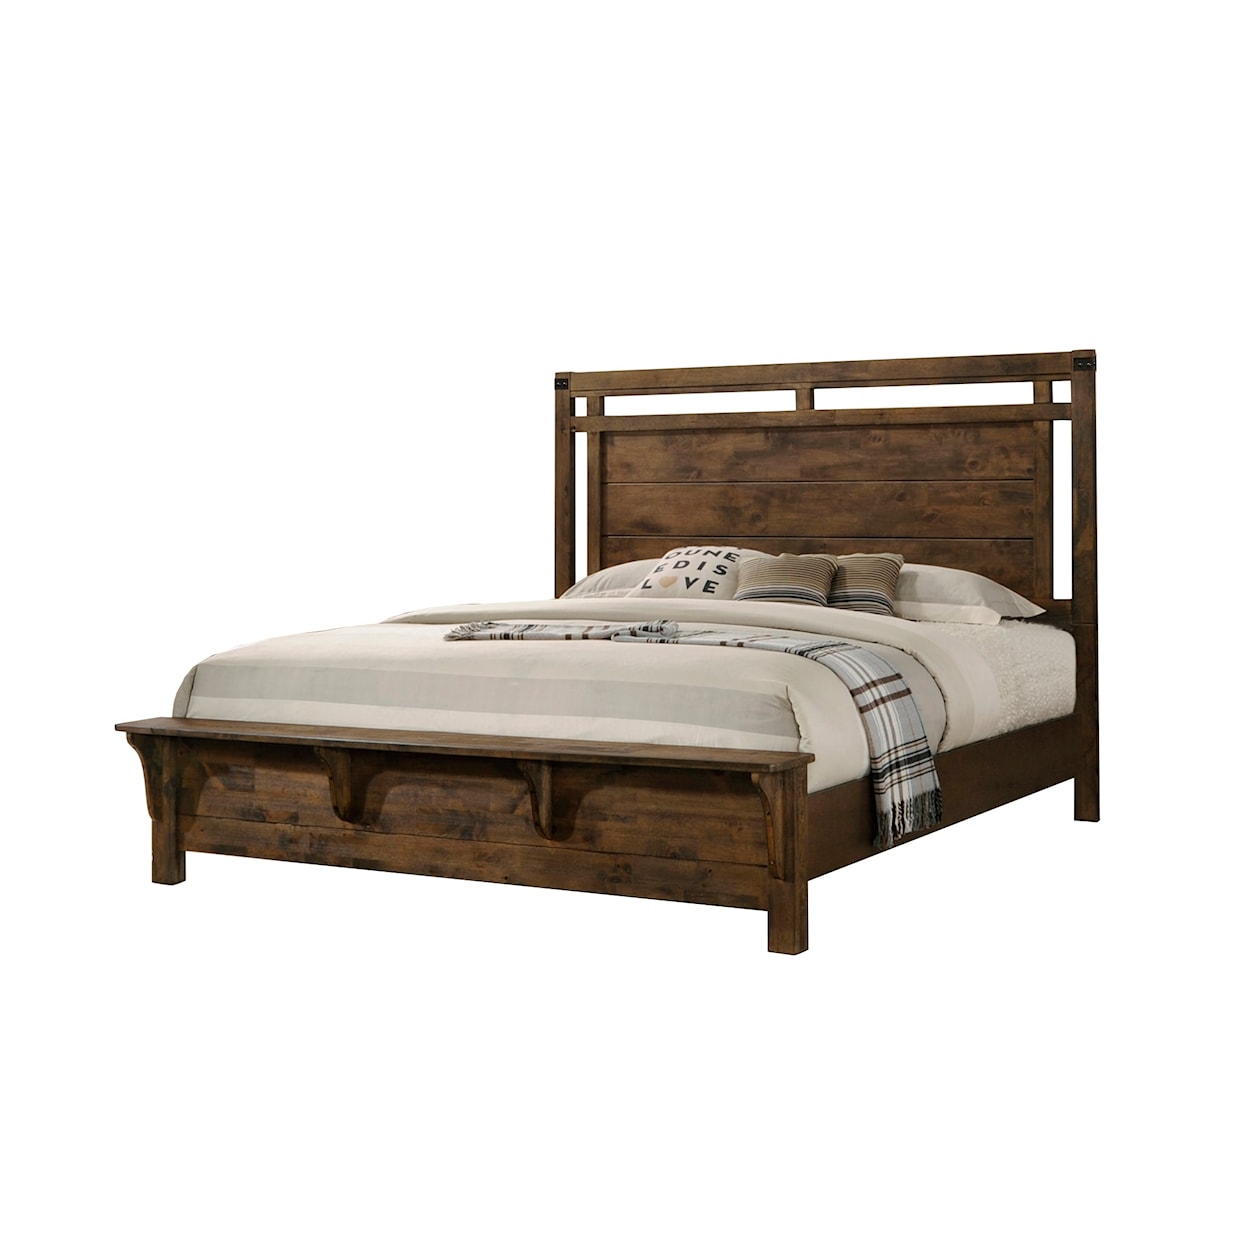 Crown Mark Curtis King Panel Bed